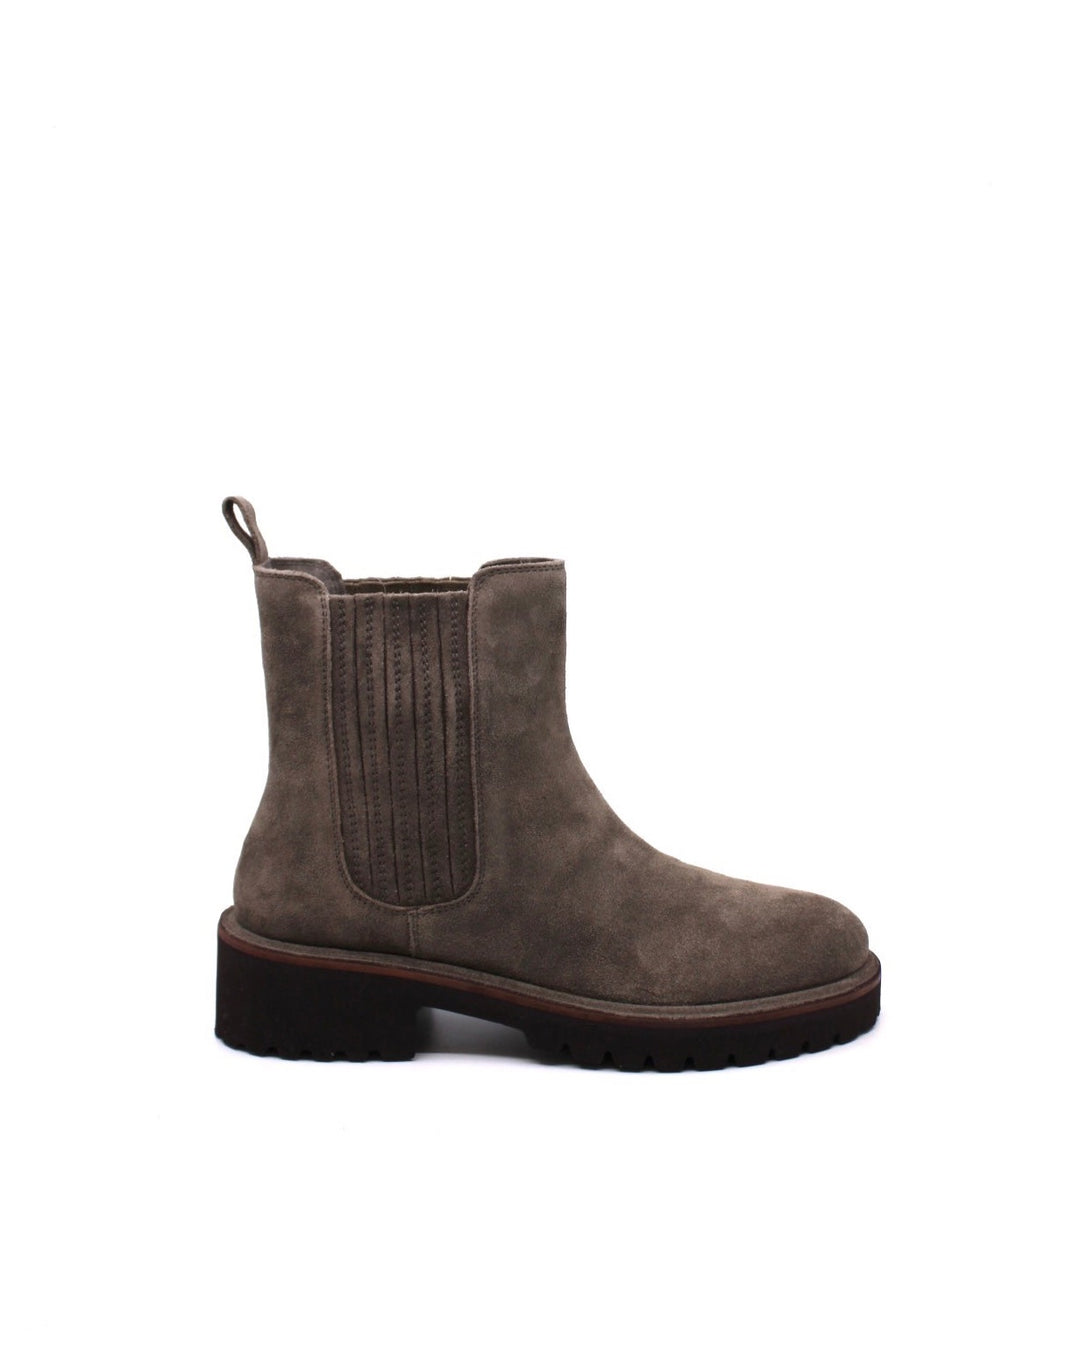 Seychelles Cashew Boot Taupe - Dear Lucy